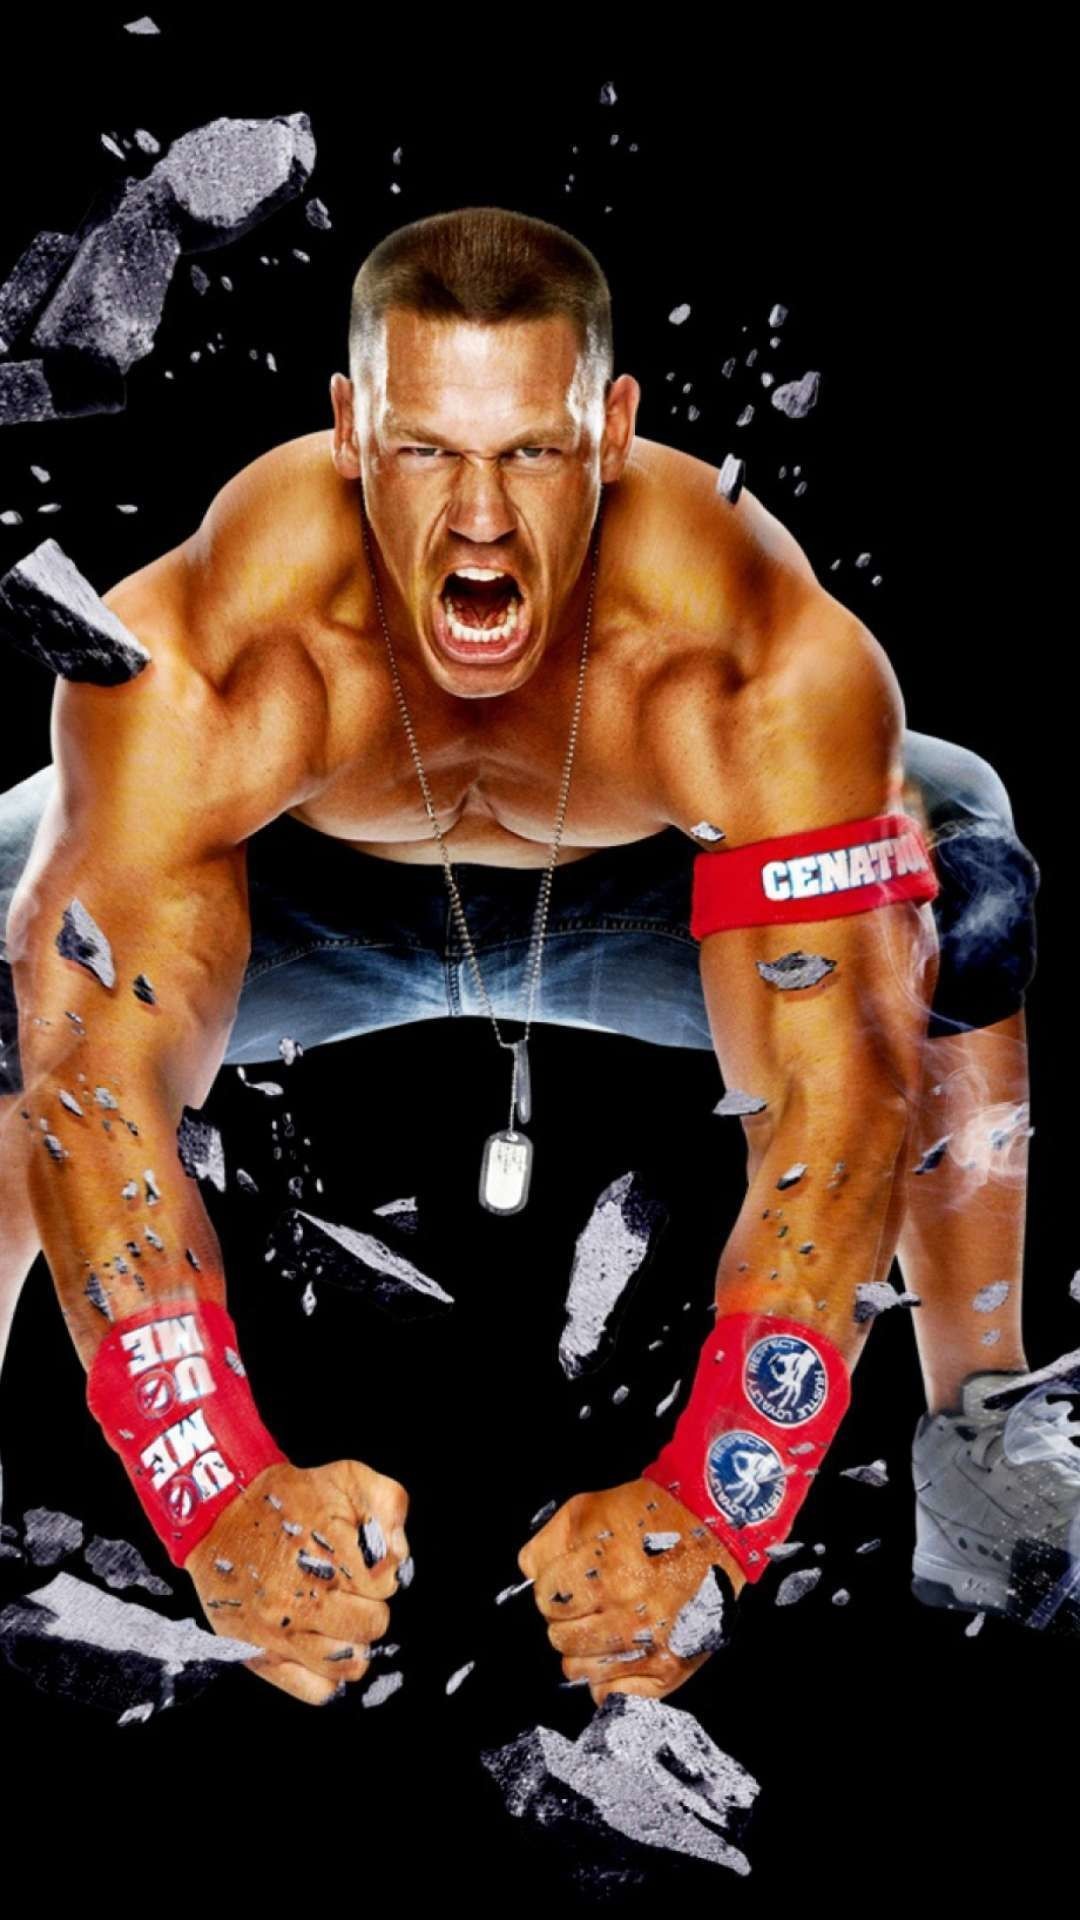 1080x1920 1920x1080 John Cena Birthday Card with sound Unique Wwe Hd Wallpapers for  Desktop iPhone Ipad and android